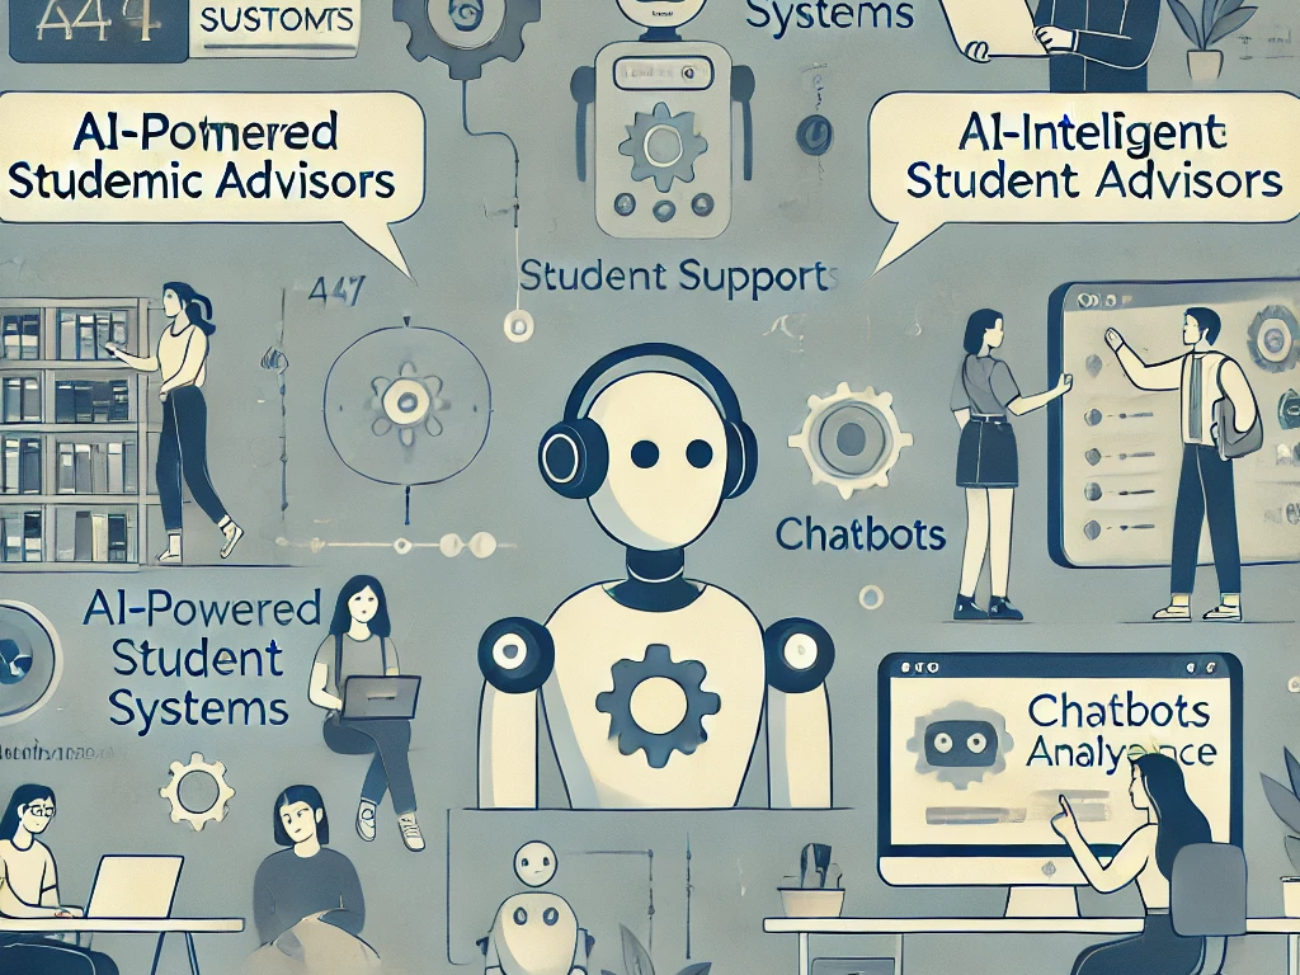 DALL·E 2024-06-26 12.54.47 - A subtle illustration depicting various automated student support systems in online education. The image includes elements like AI-powered academic ad